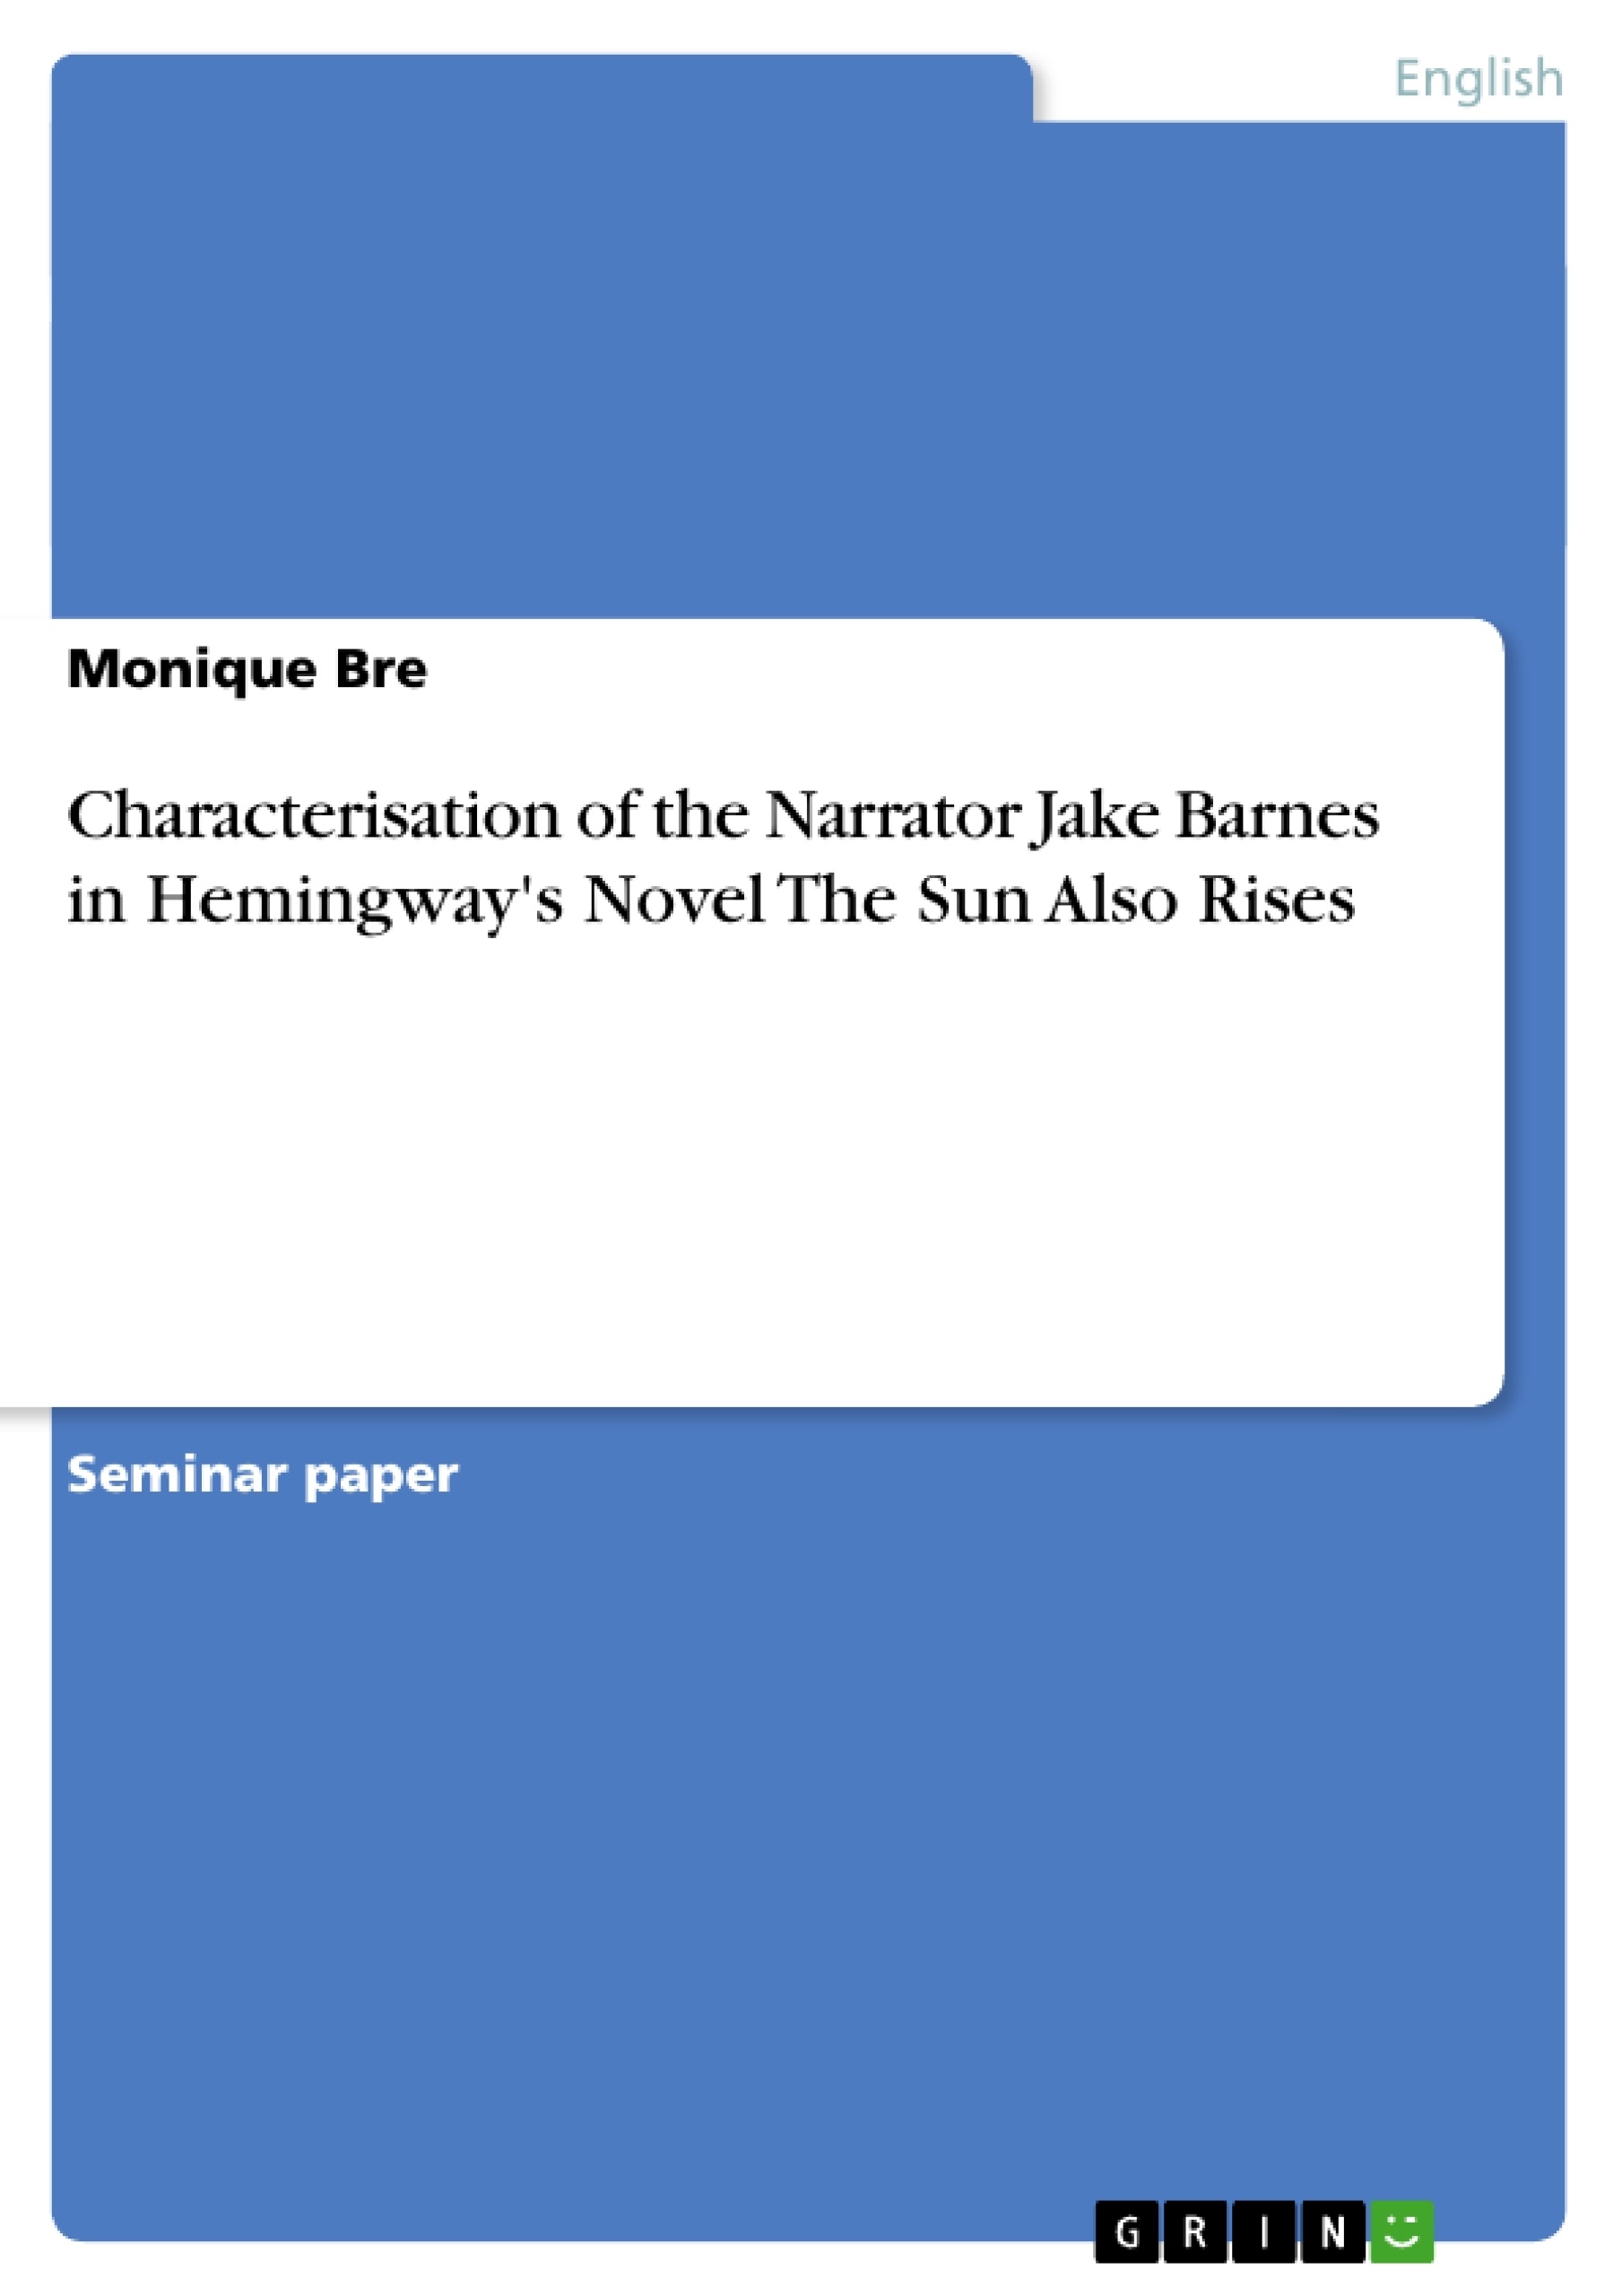 Title: Characterisation of the Narrator Jake Barnes in Hemingway's Novel The Sun Also Rises